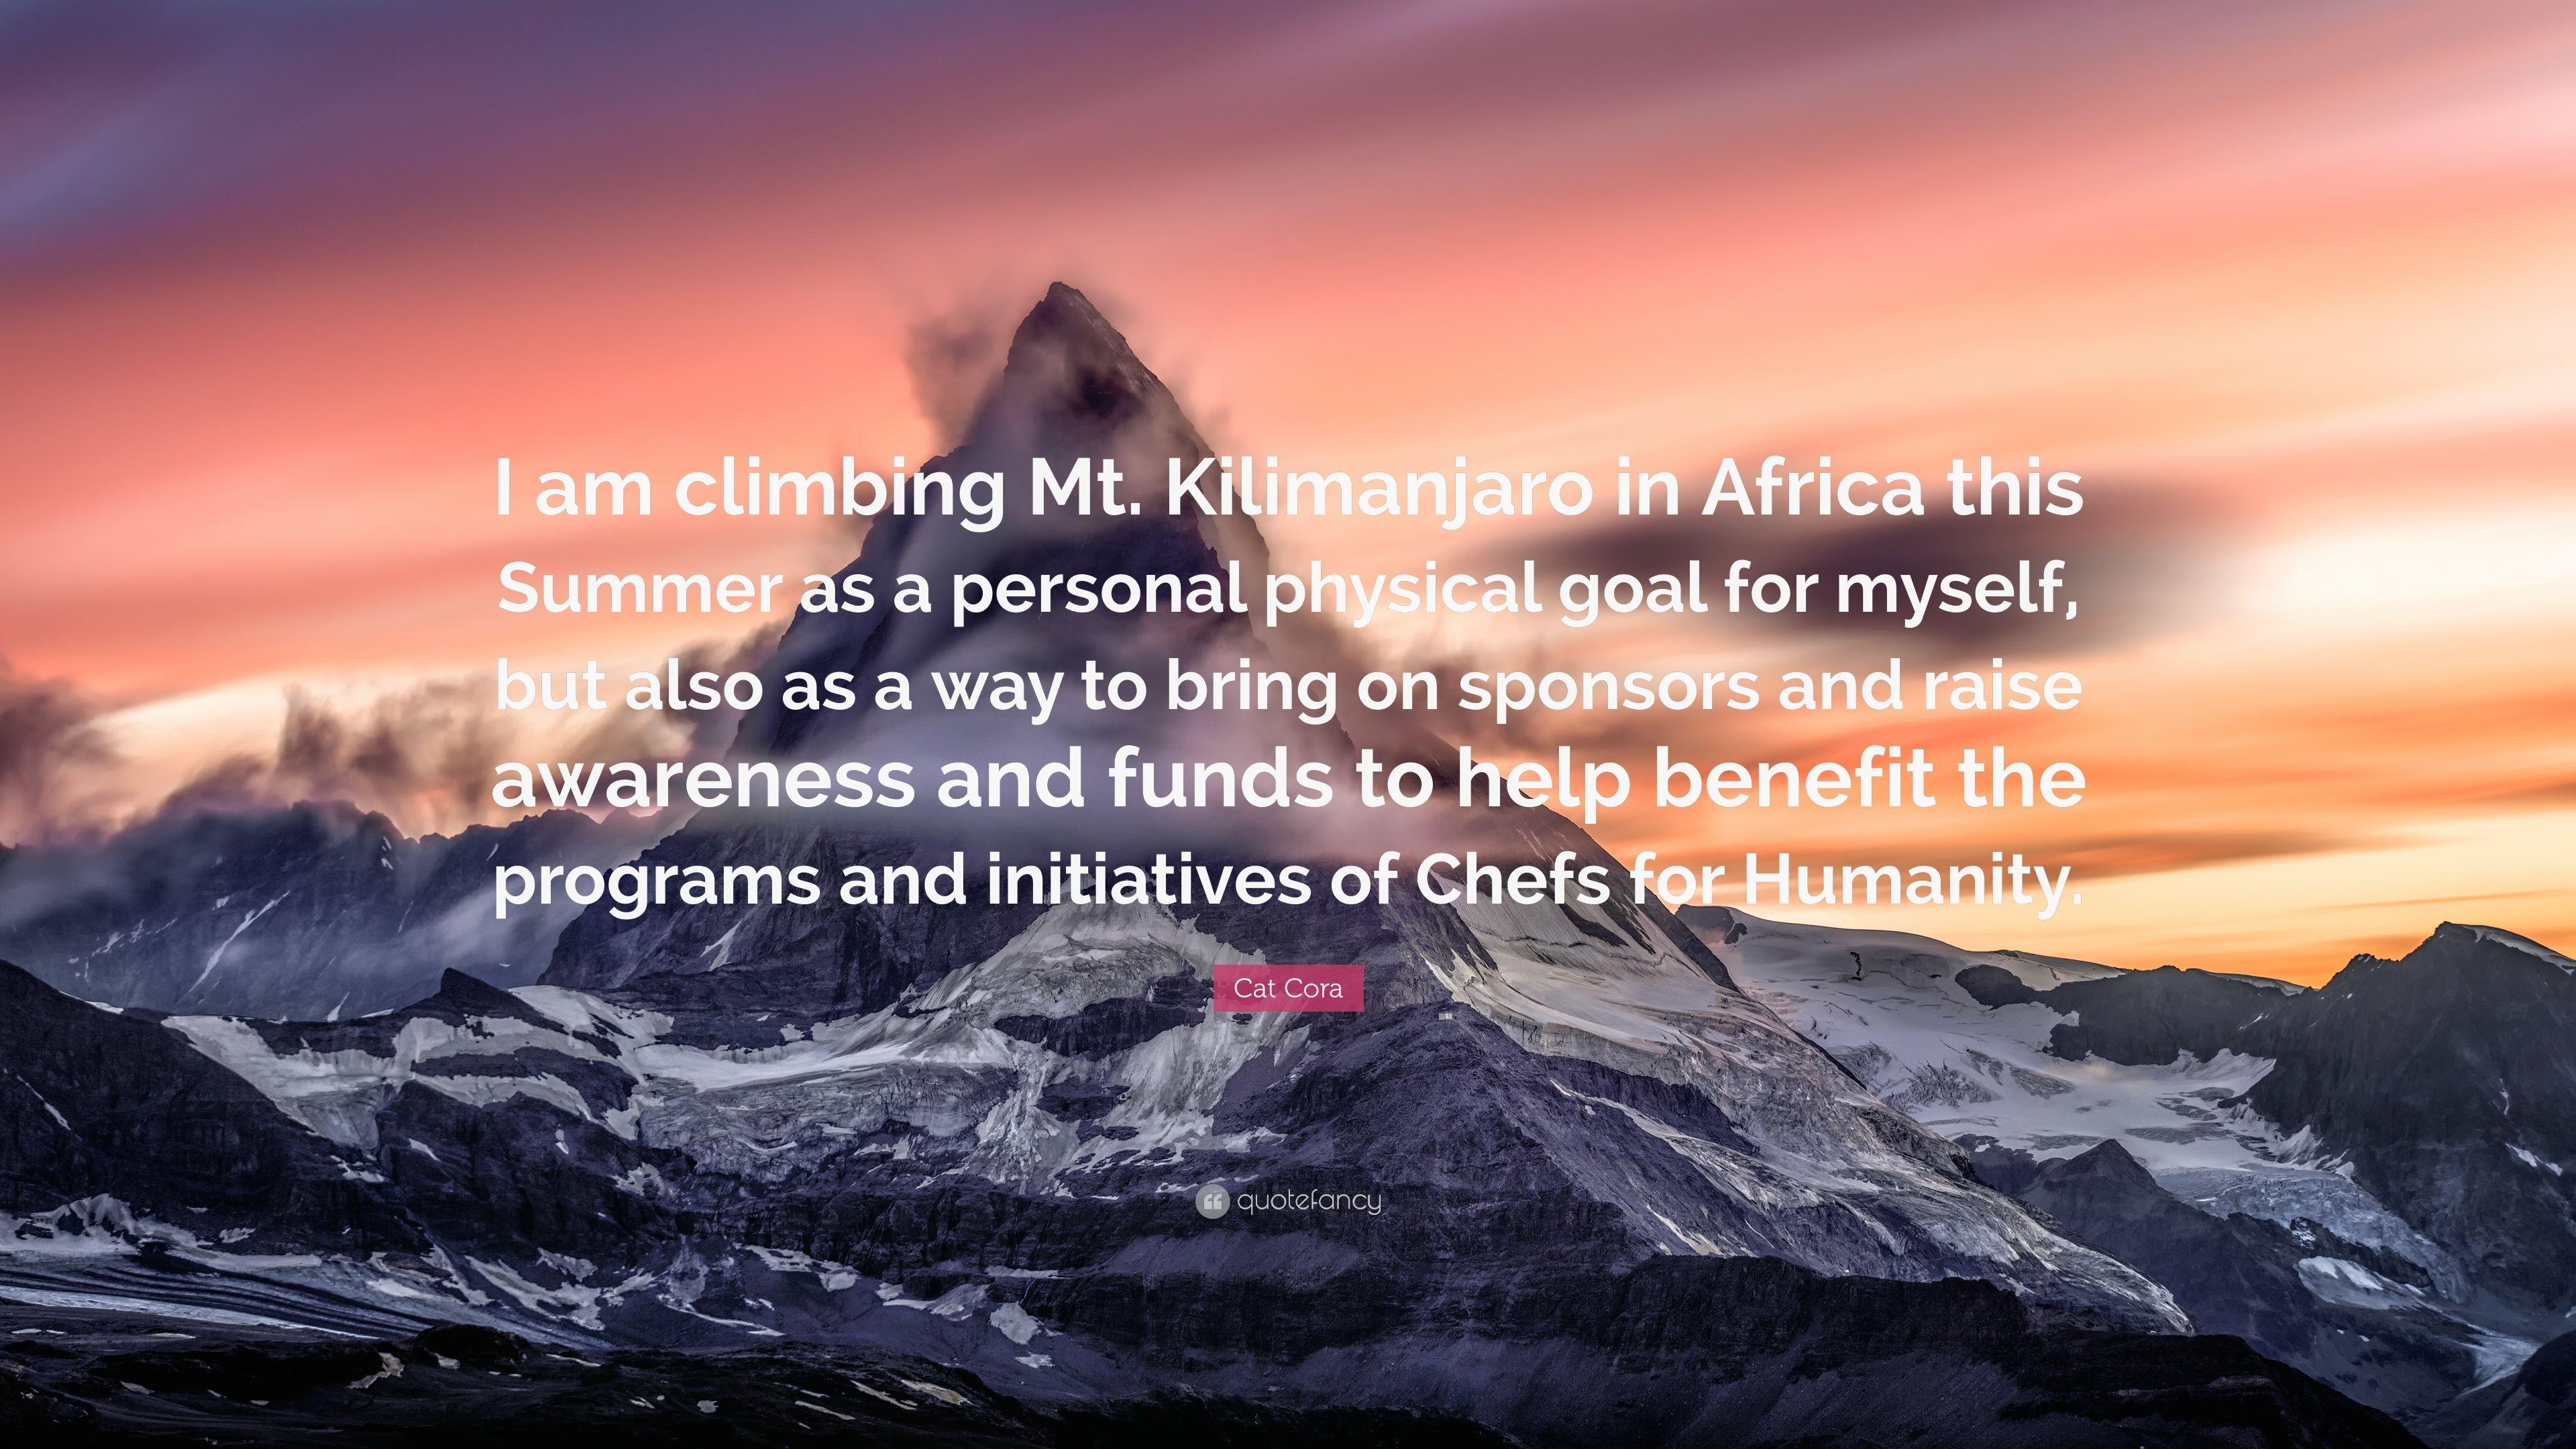 Cat Cora Quote: “I am climbing Mt. Kilimanjaro in Africa this Summer